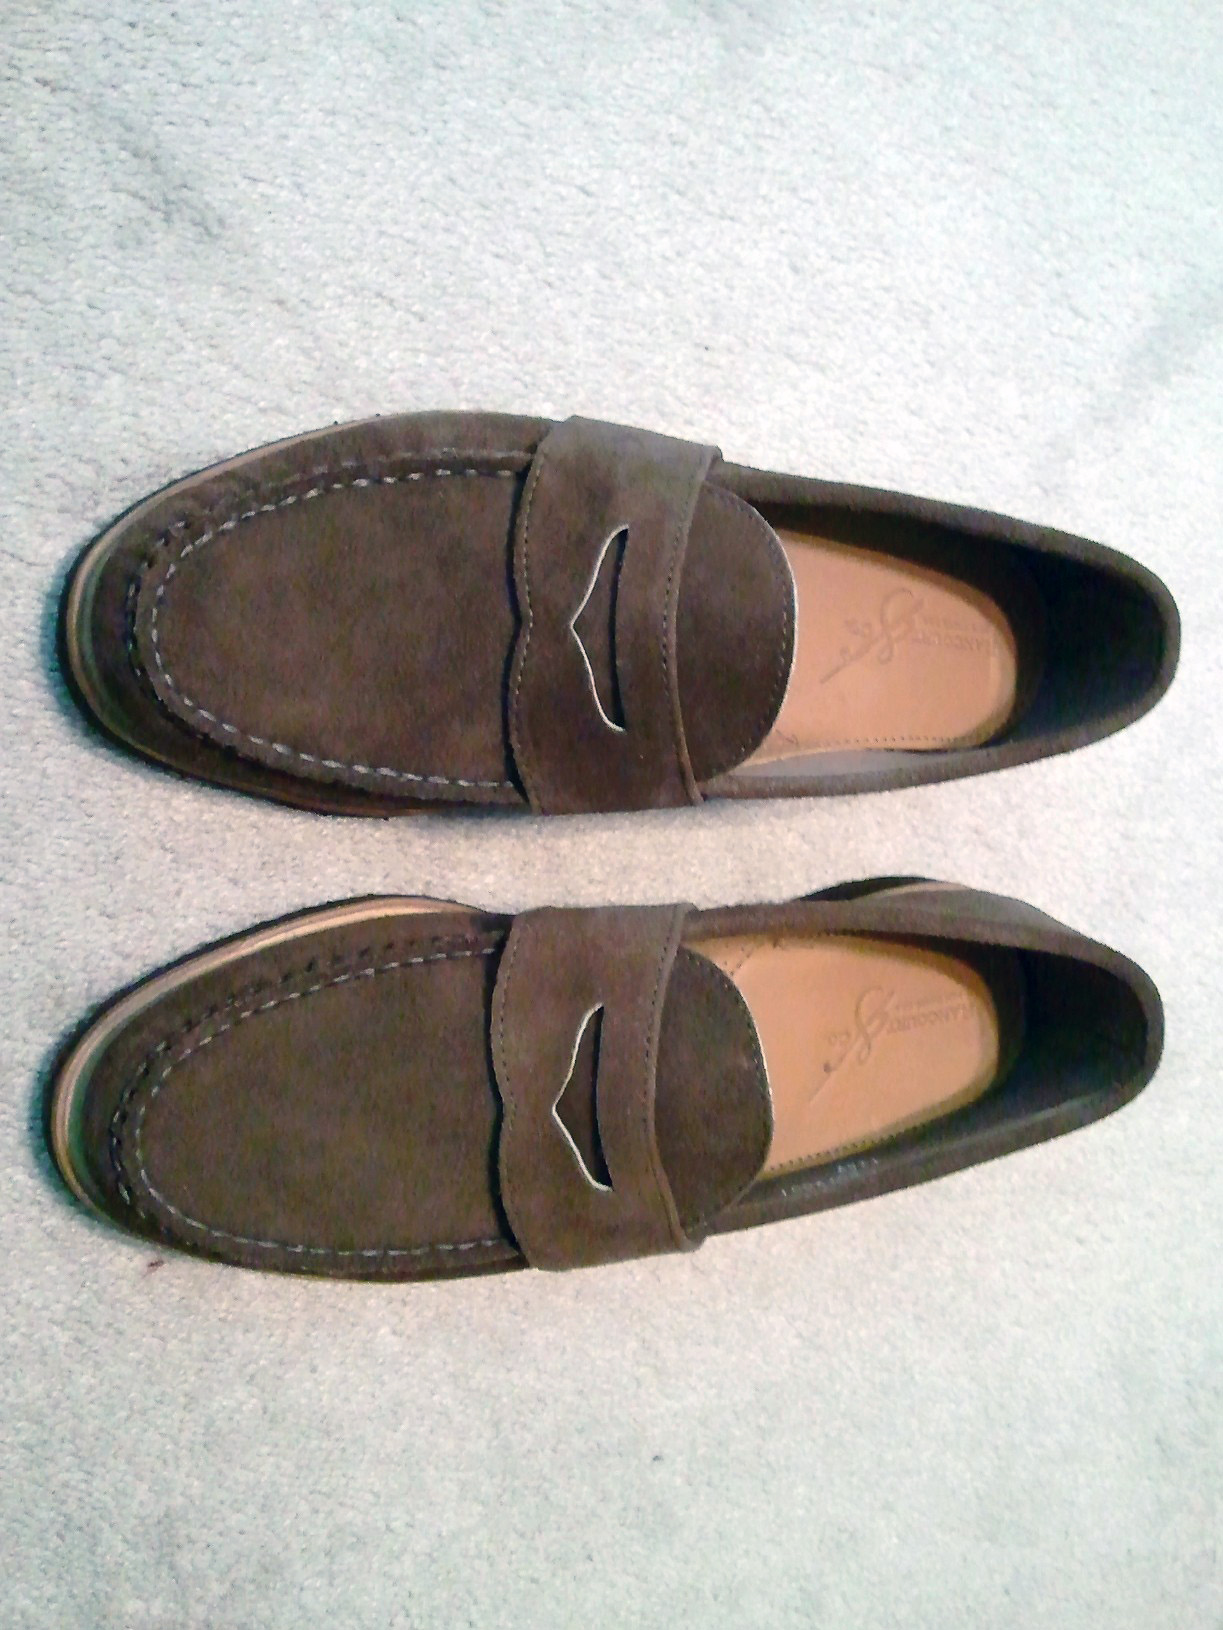 RANCOURT & Co. Shoes - Made in Maine | Page 185 | Styleforum